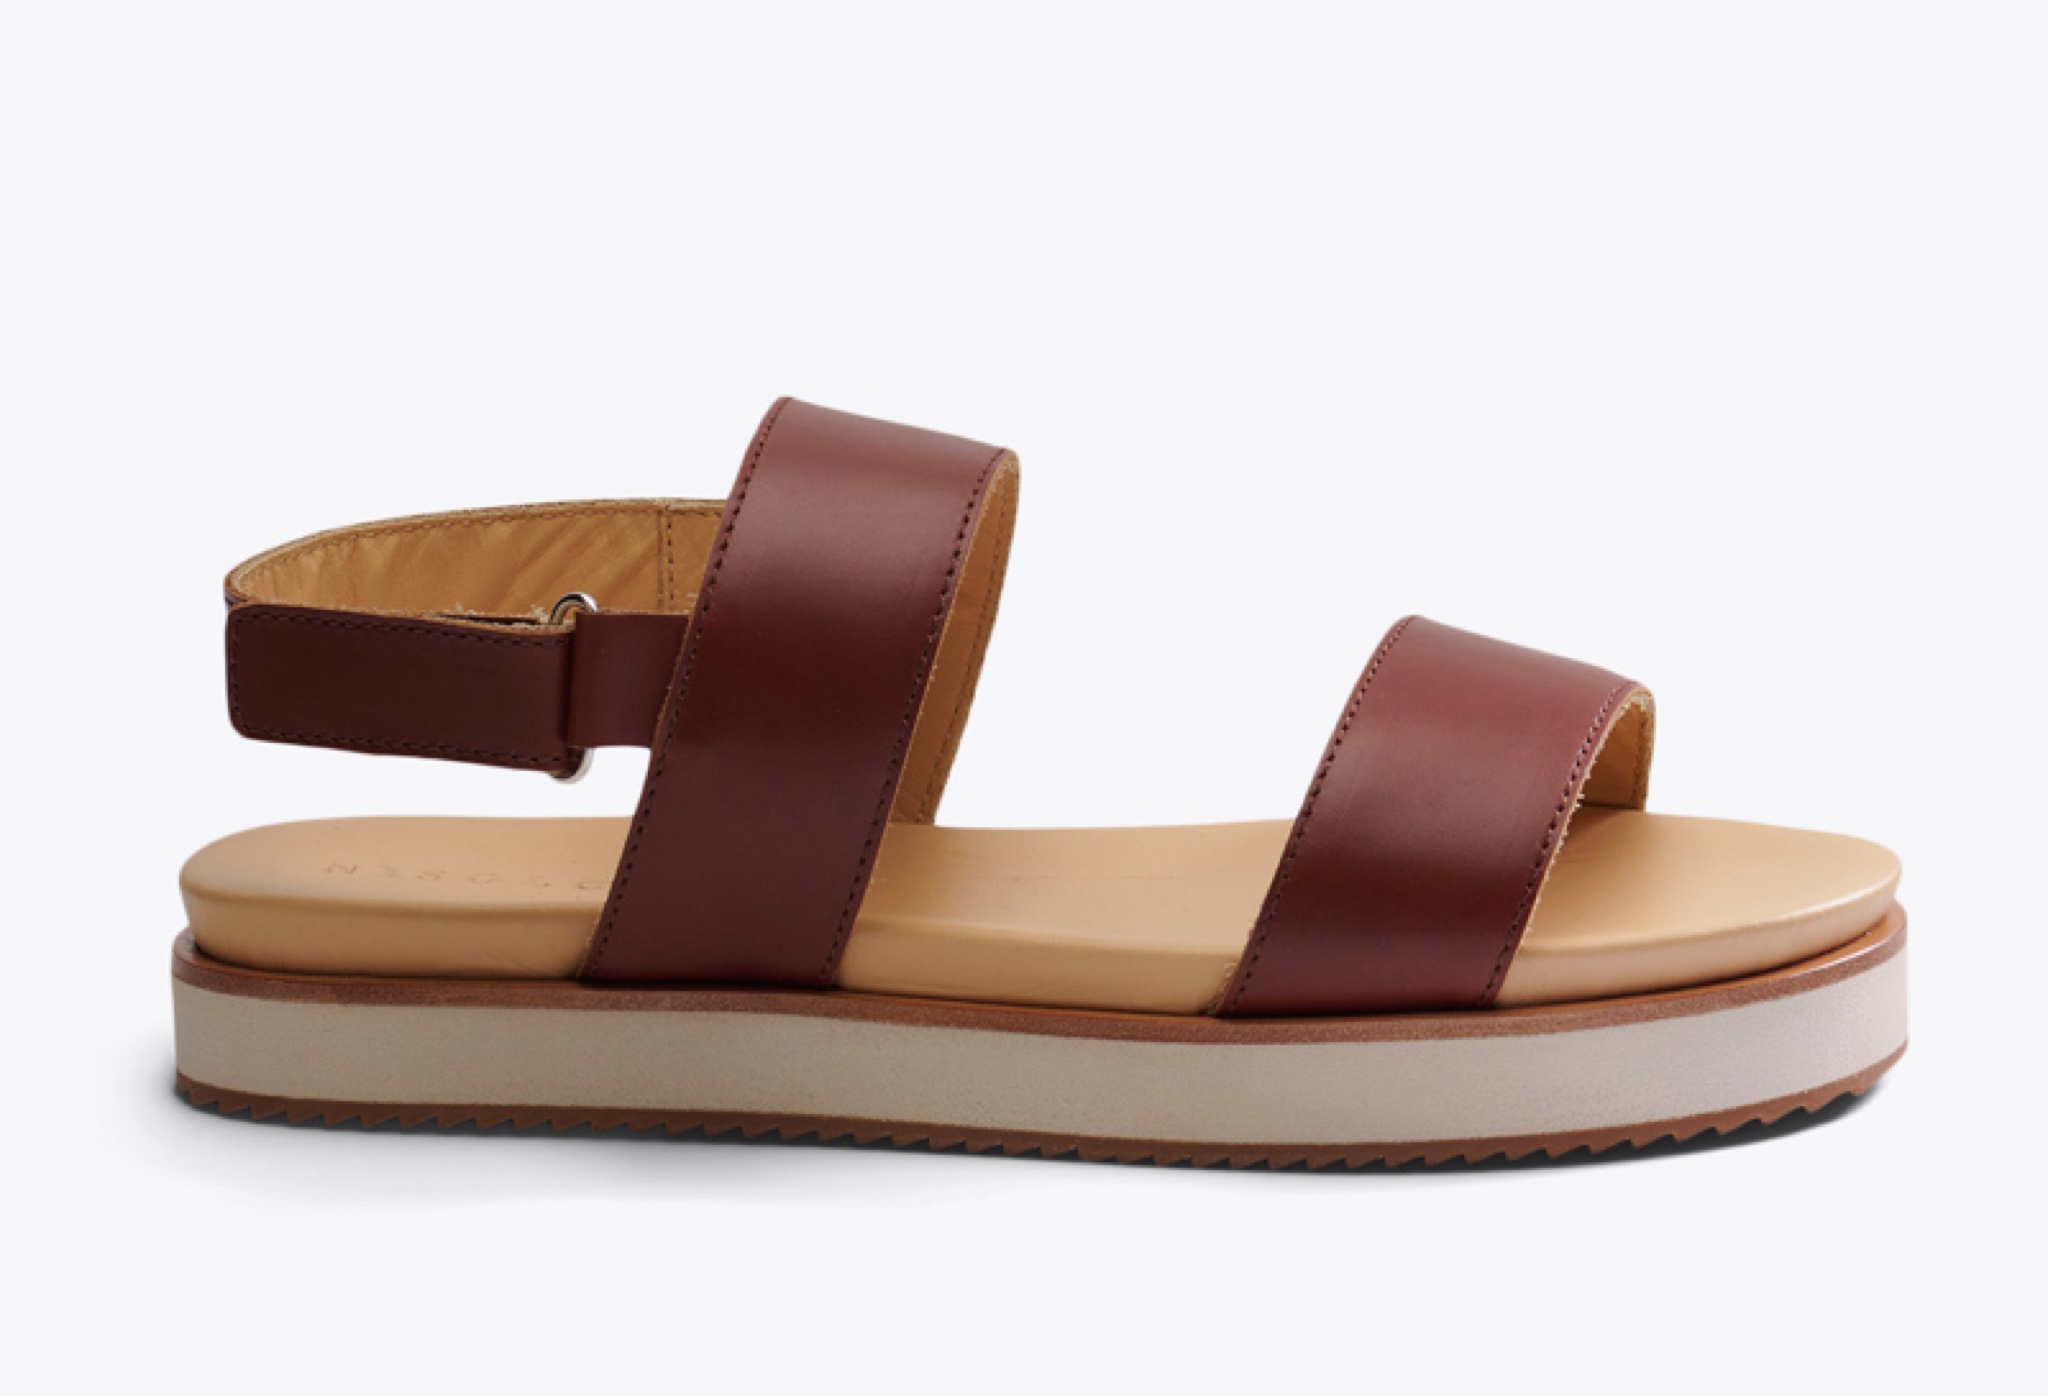 Nisolo Go-To Flatform Sandal Brandy - Every Nisolo product is built on the foundation of comfort, function, and design. 